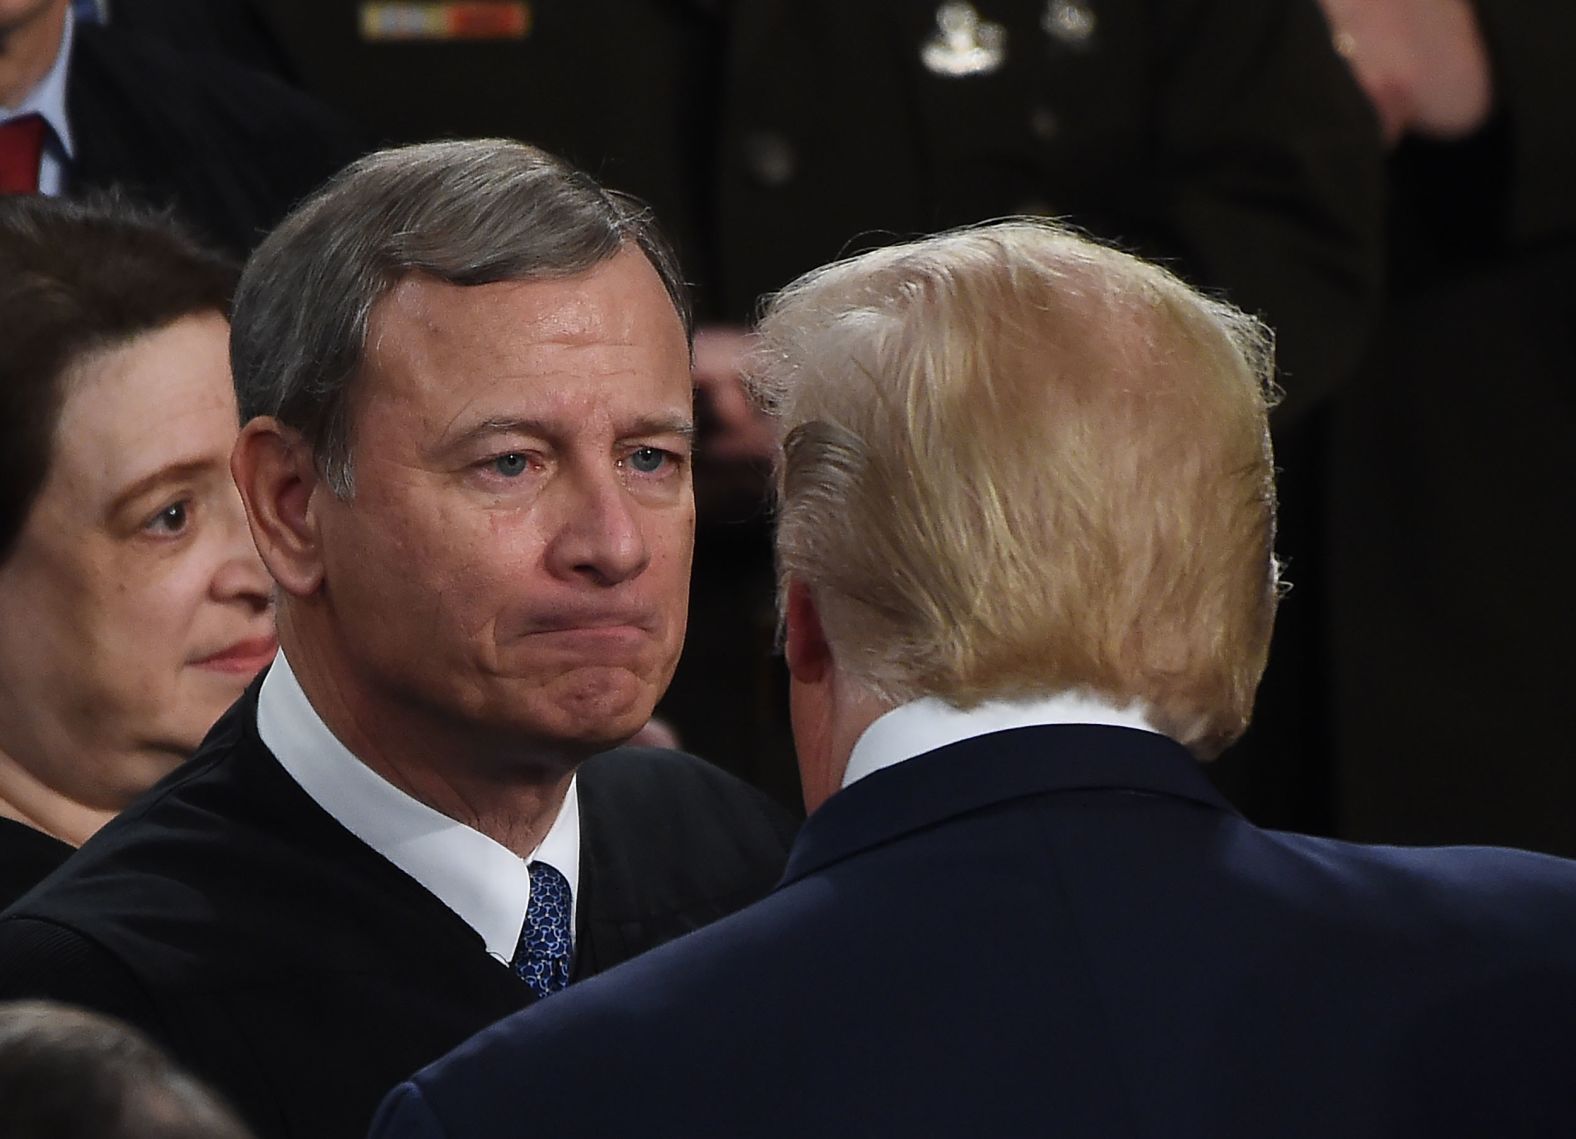 Trump greets Chief Justice John Roberts, who has recently spent hours in Congress presiding over the President's impeachment trial. Justices Neil Gorsuch, Brett Kavanaugh and Elena Kagan <a href="https://www.cnn.com/politics/live-news/state-of-the-union-2020/h_bc3ed3ca57467d7d5ca4438ae1a4d4c2" target="_blank">were also in attendance.</a>